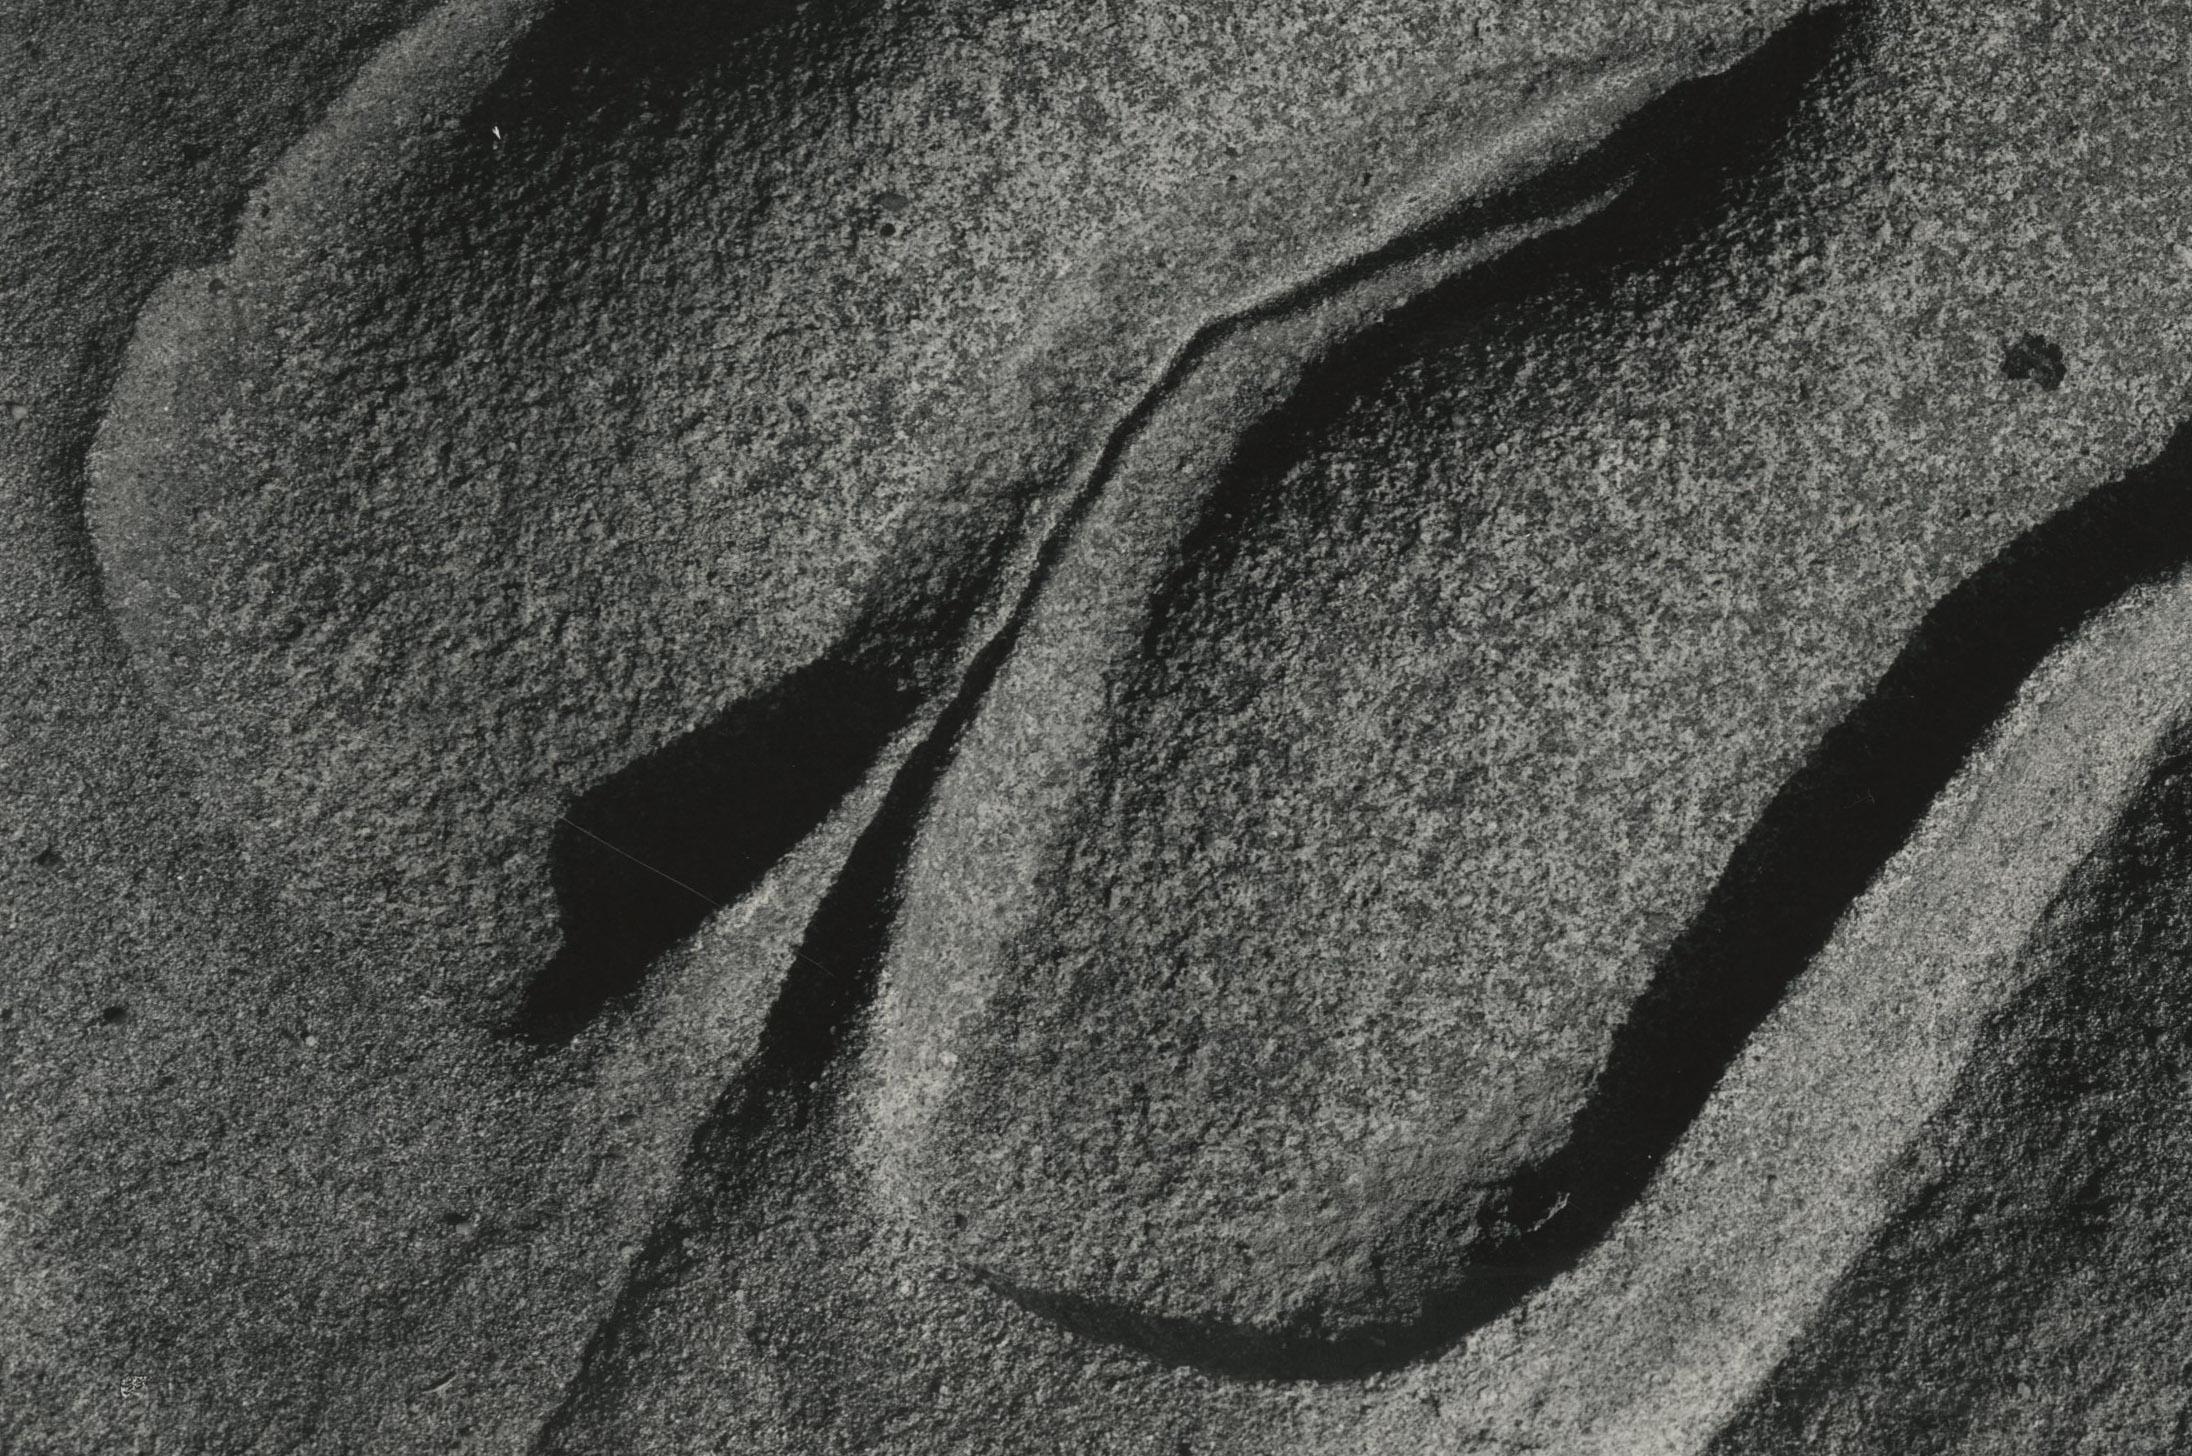 Eroded Rock, Point Lobos - Photograph by Edward Weston